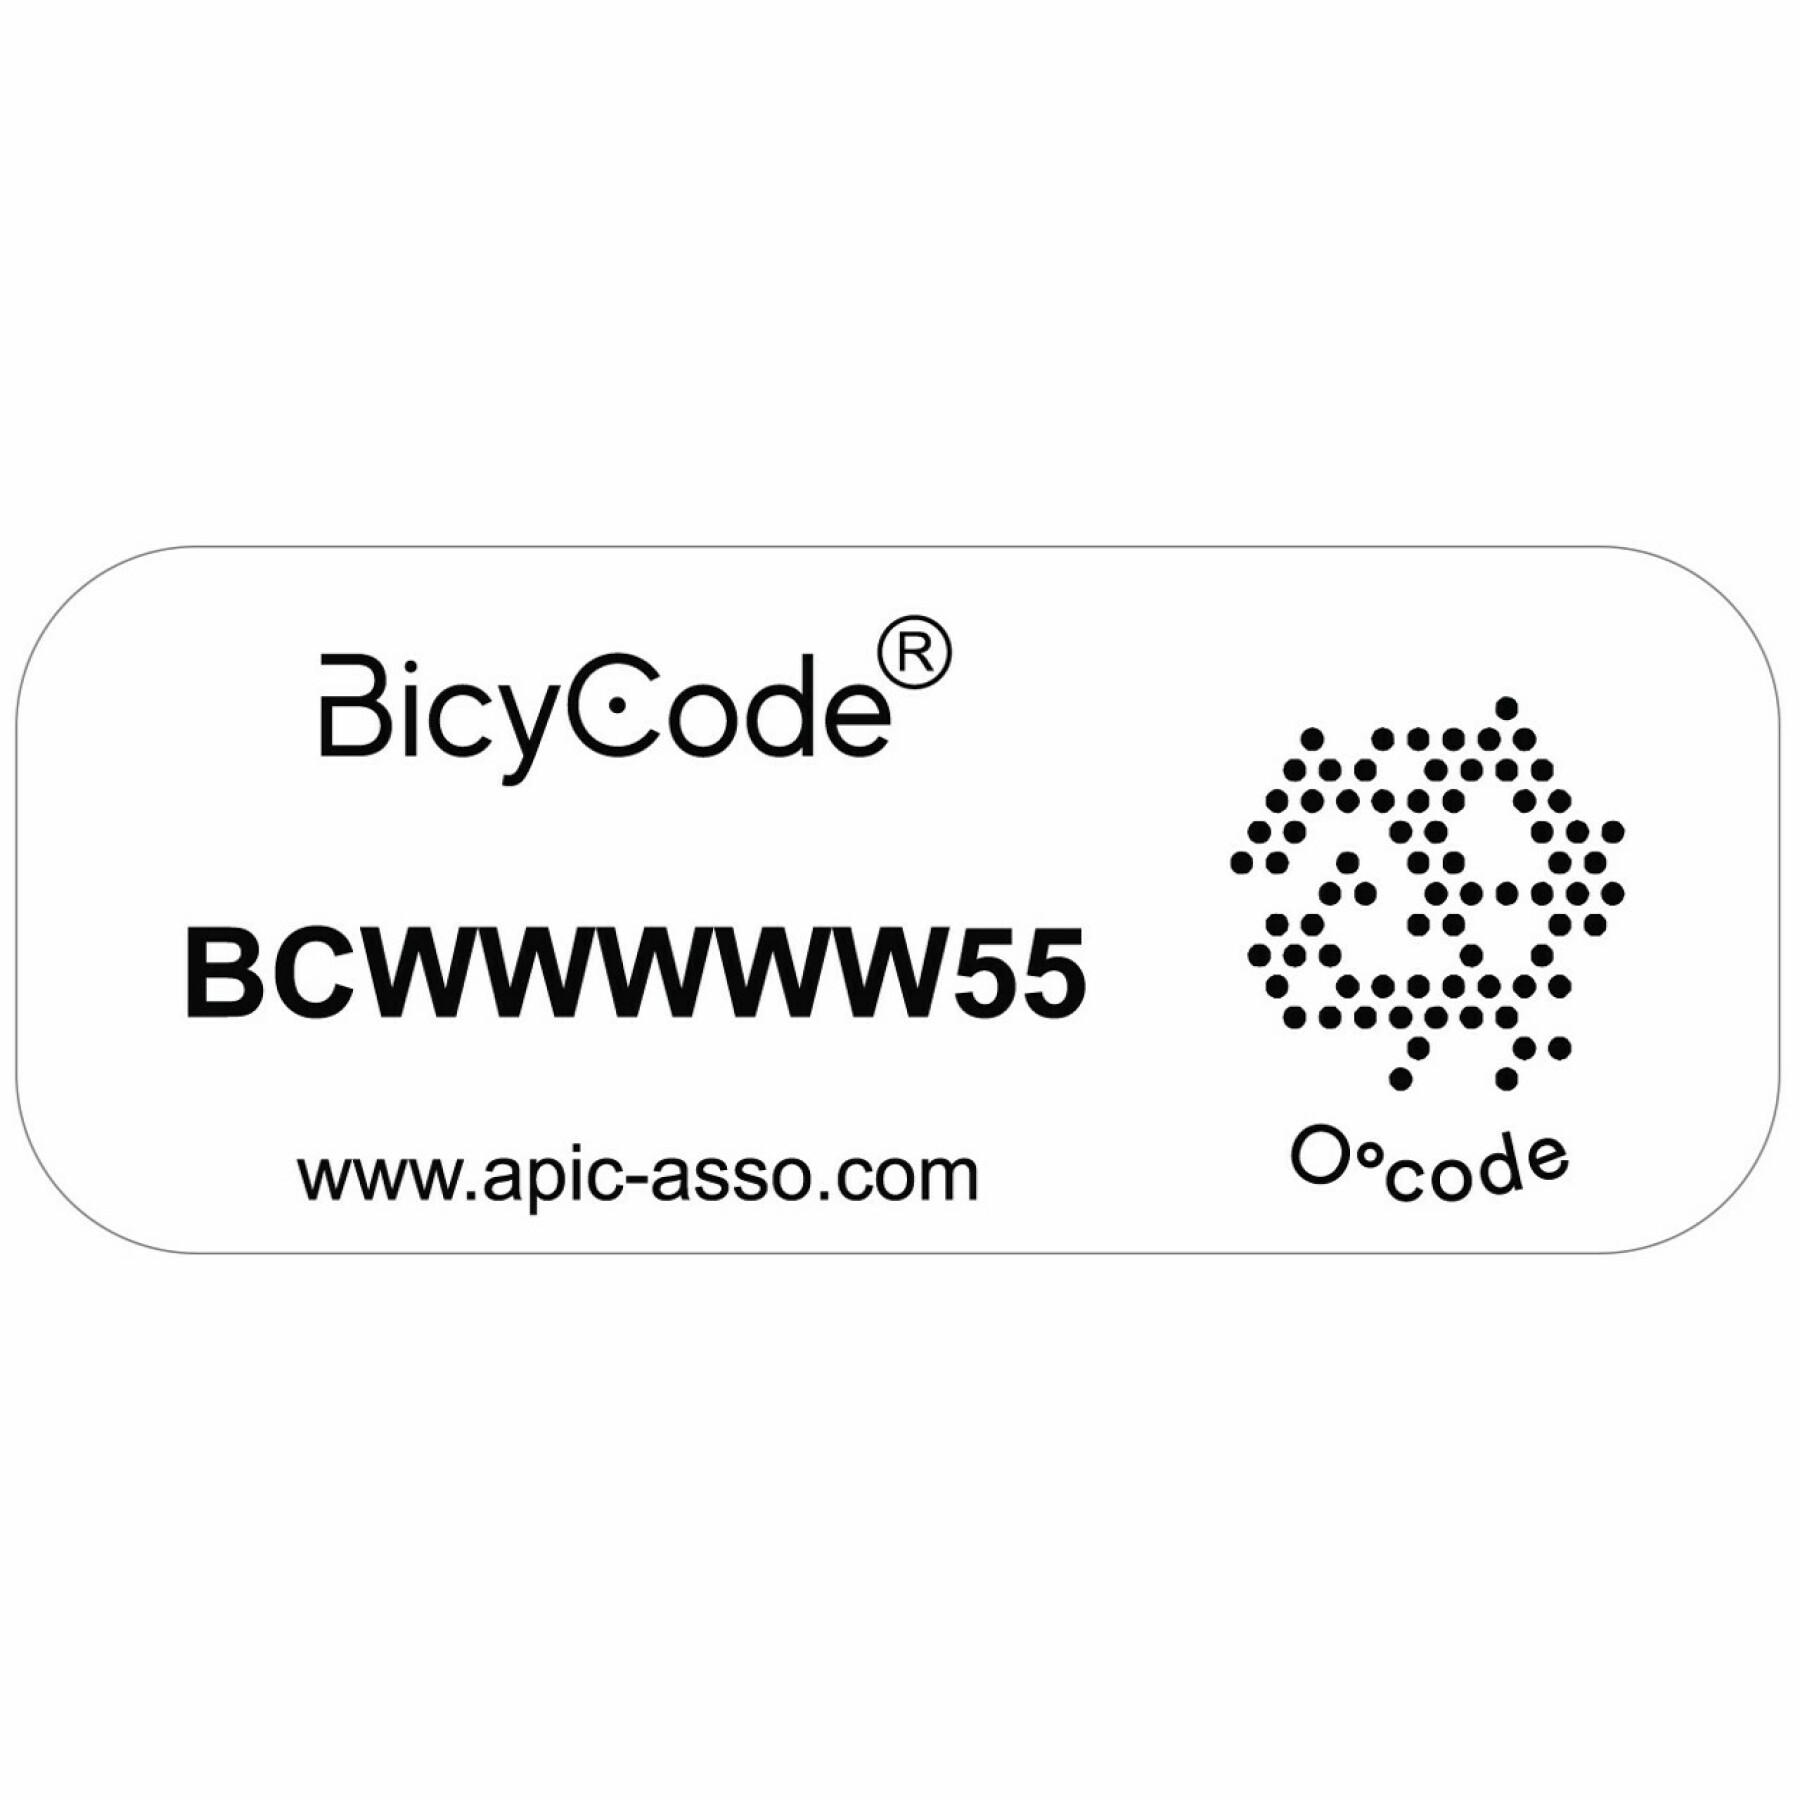 Pack of 30 permanent resin label stickers included Bicycode